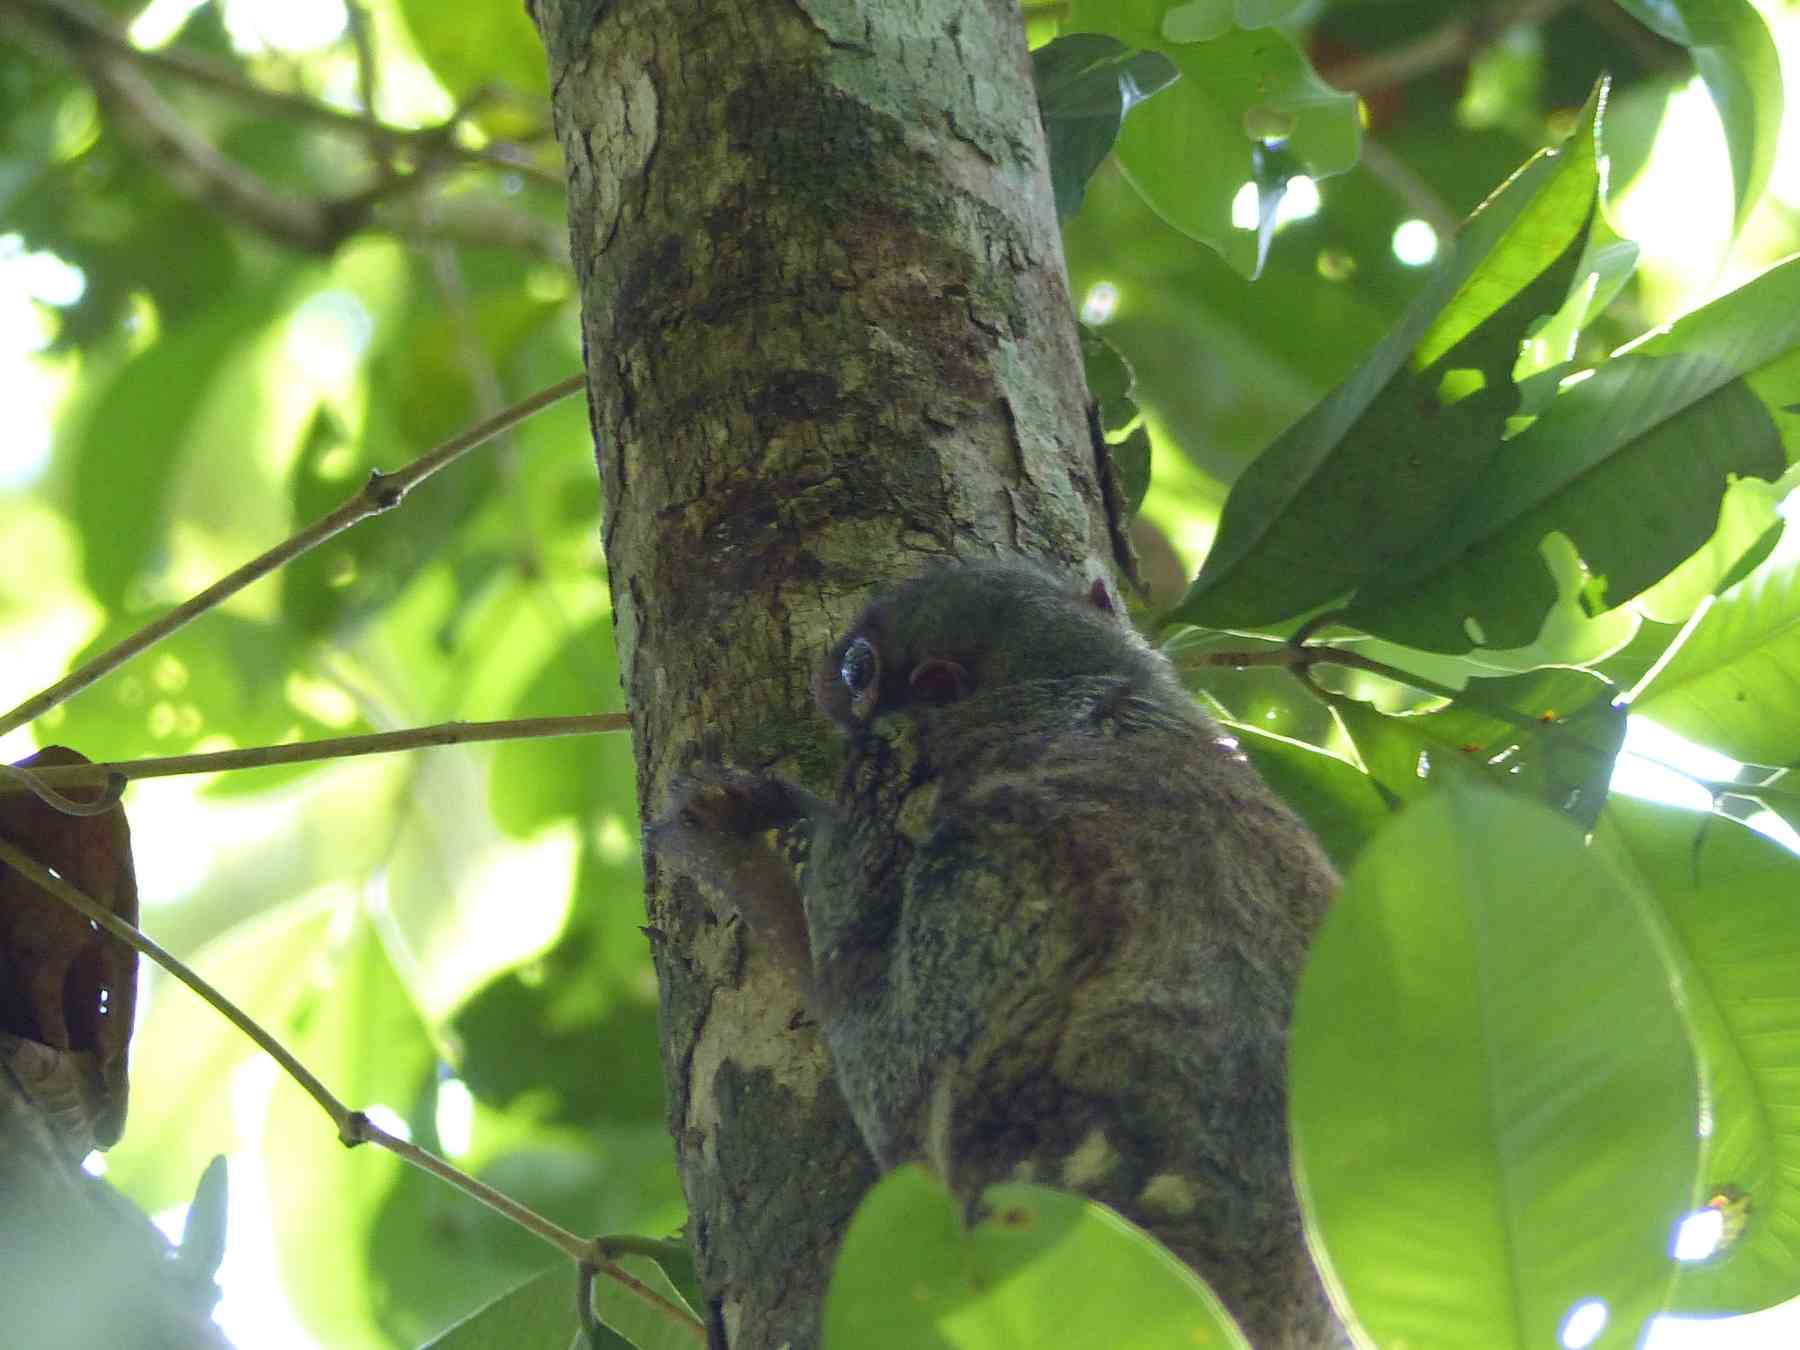 Against the bark of the tree, the Colugo is neatly camouflaged